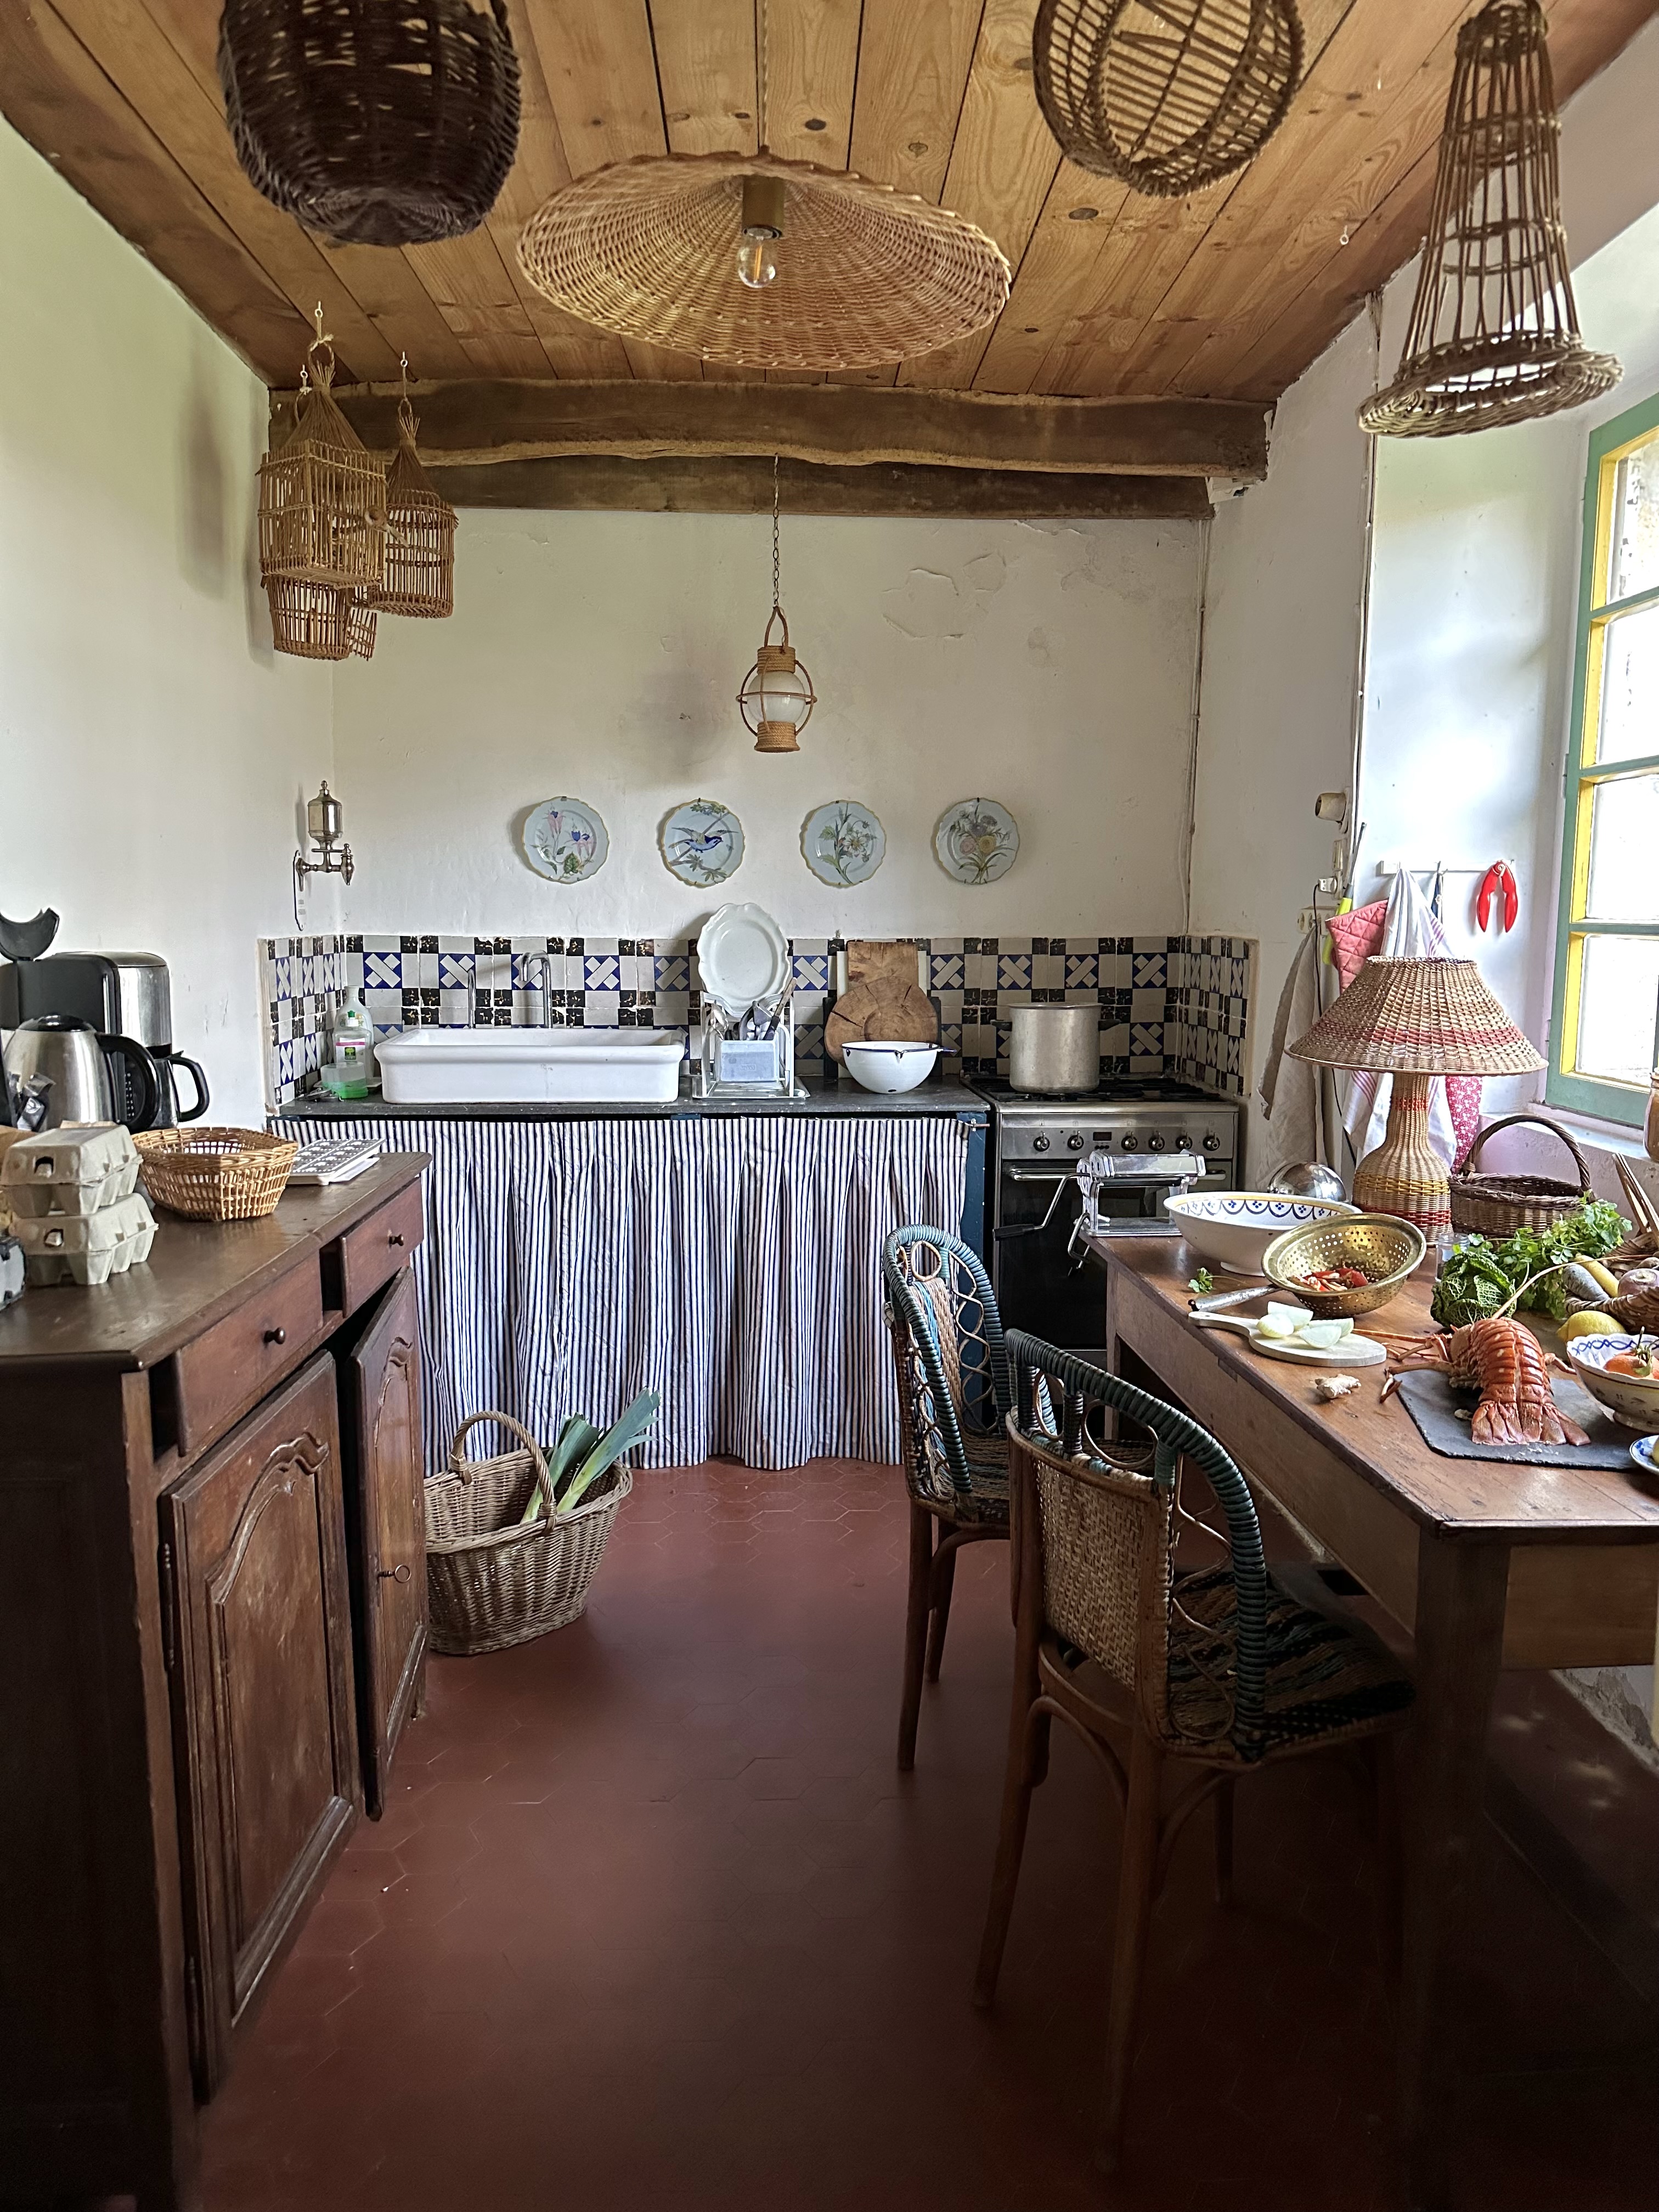 the kitchen retains its \1960s tiled floor and rustic buffet and table. beno&#x 21